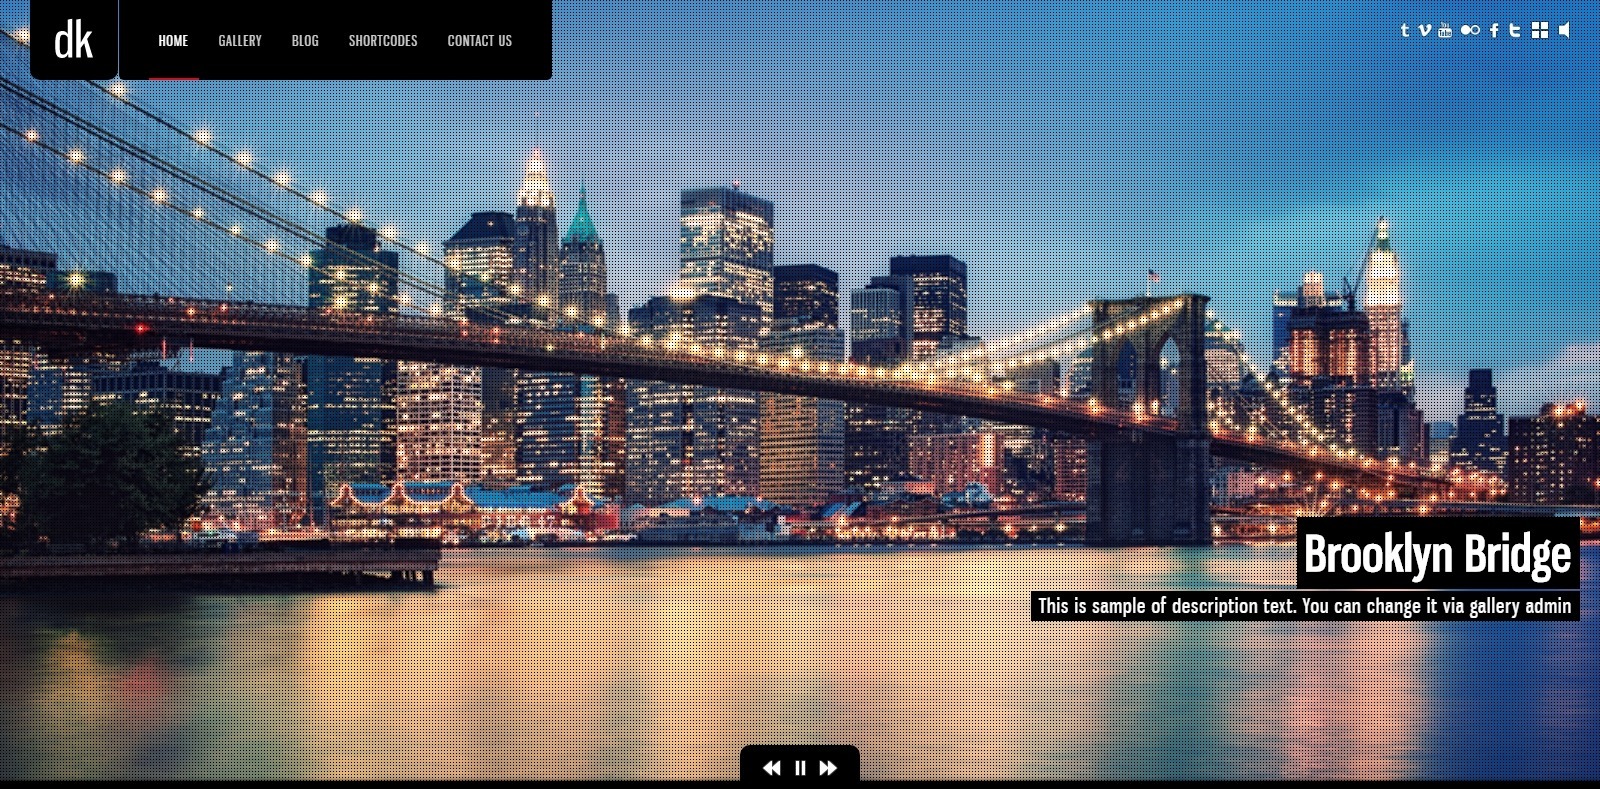 dk-photography-gallery-website-template